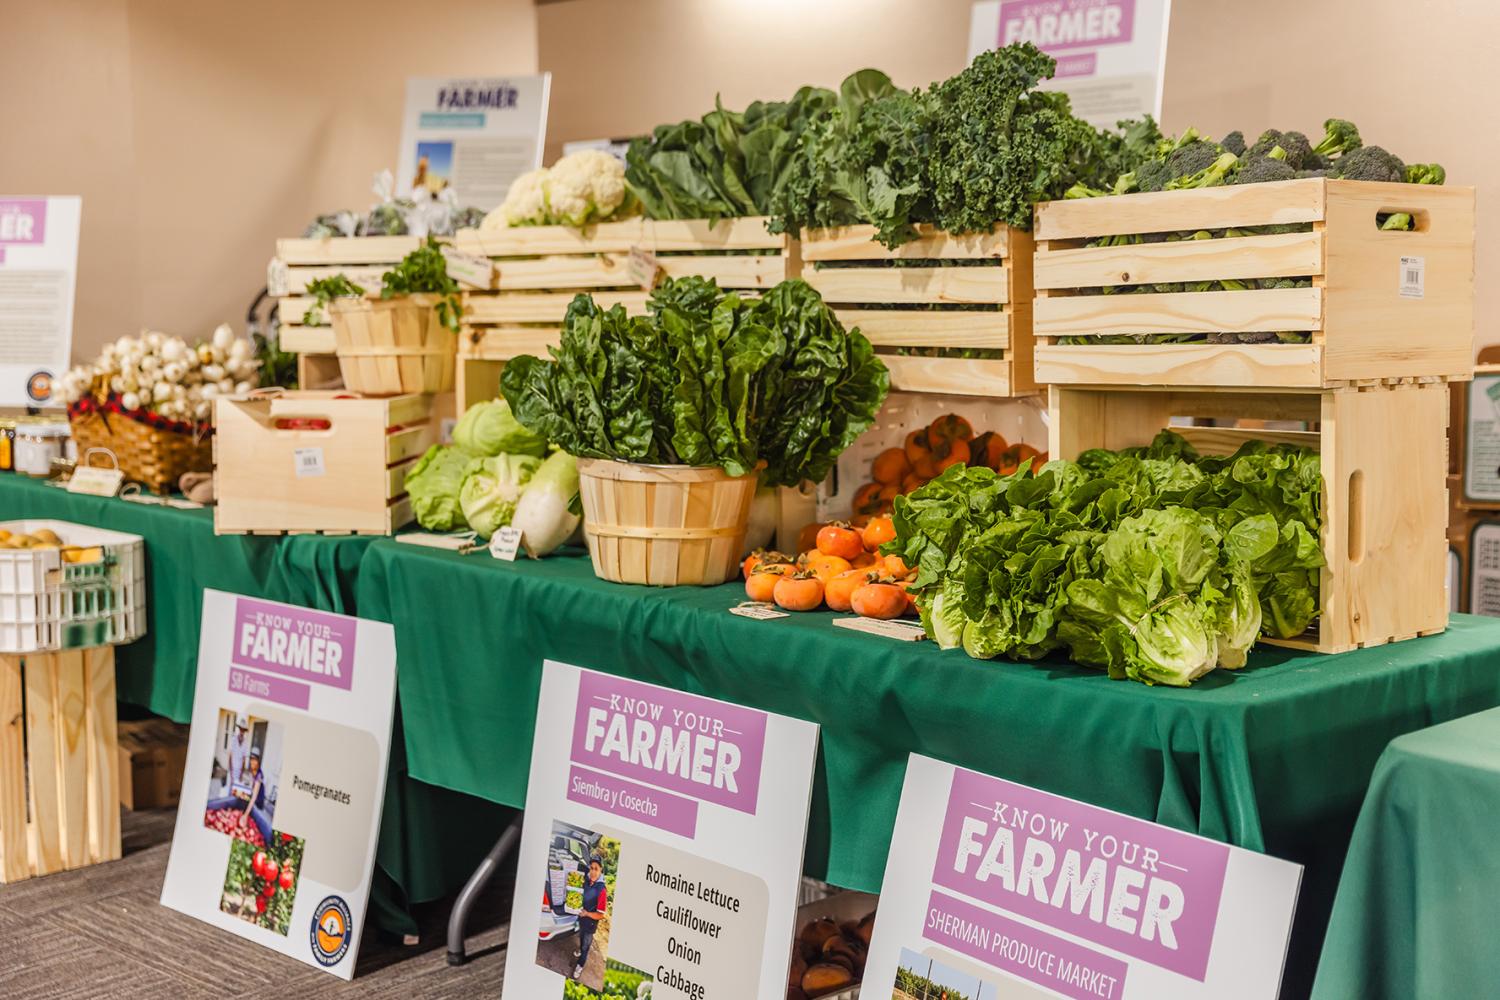 Leafy produce on a table with "Know your farmer" signs